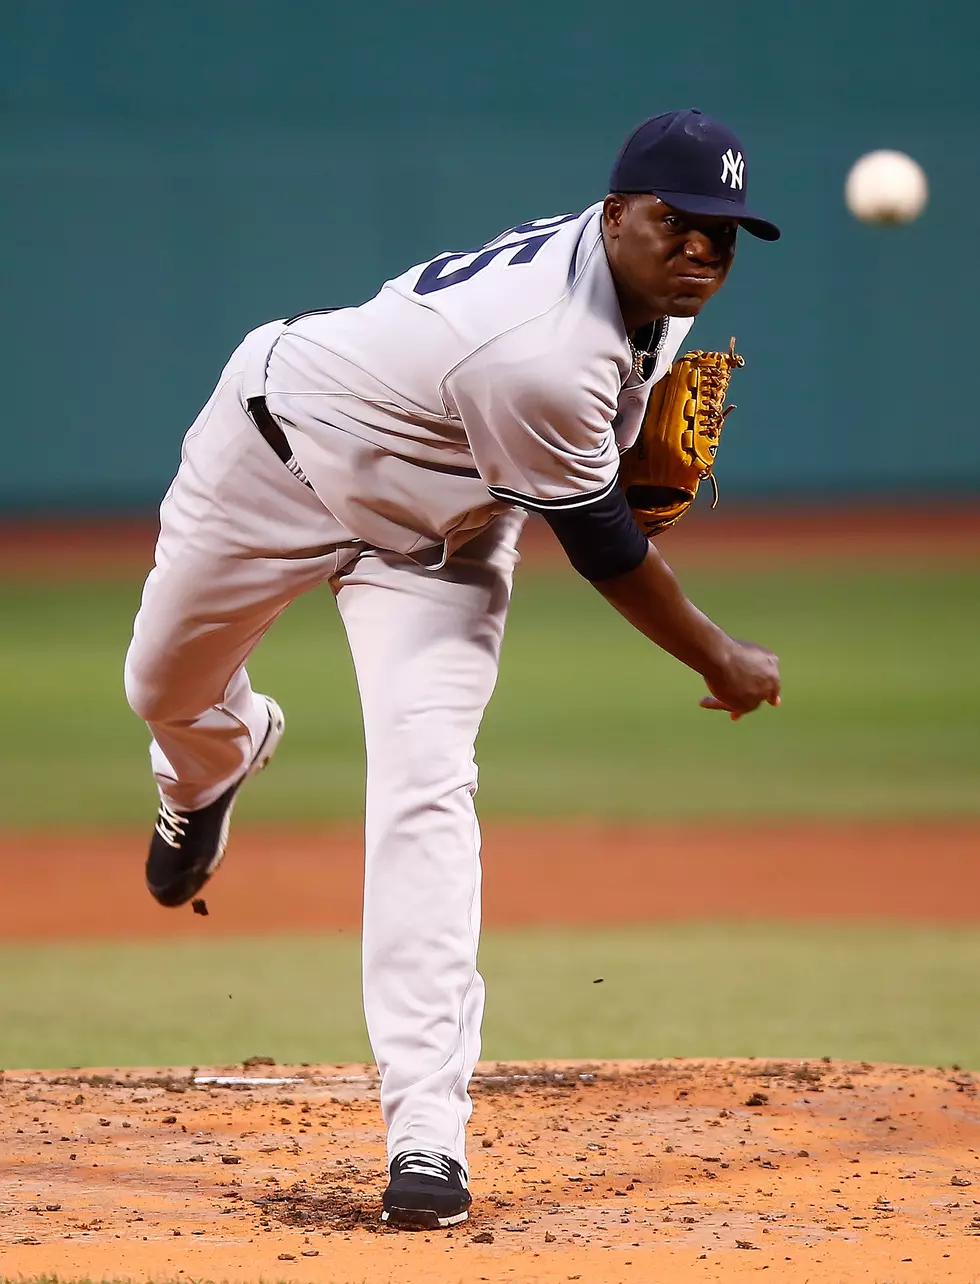 Free Beer & Hot Wings: Yankees Pitcher Michael Pineda Ejected